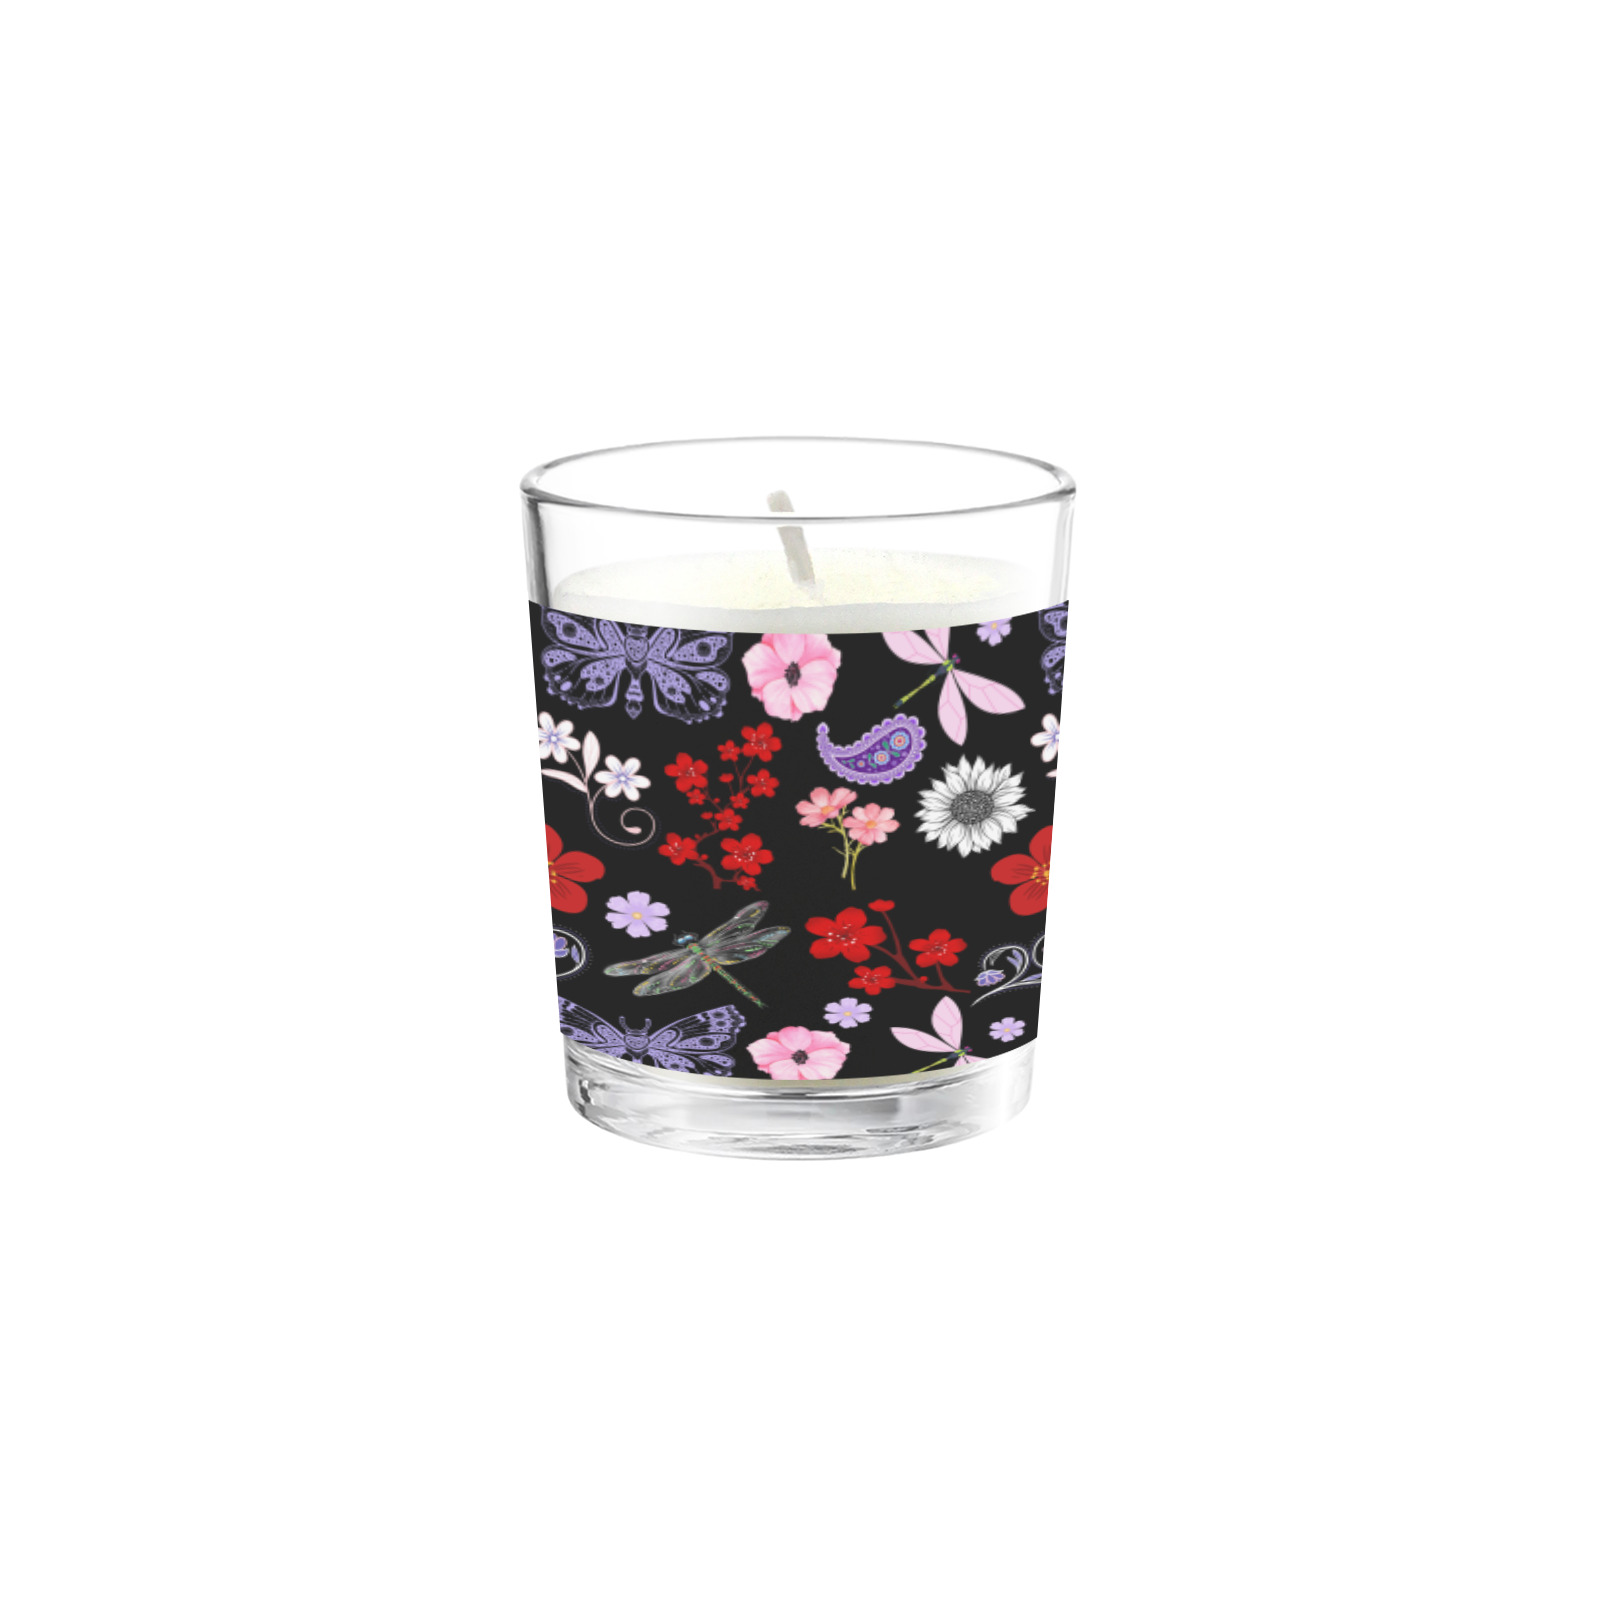 Black, Red, Pink, Purple, Dragonflies, Butterfly and Flowers Design Transparent Candle Cup Jasmine Transparent Candle Cup (Jasmine)